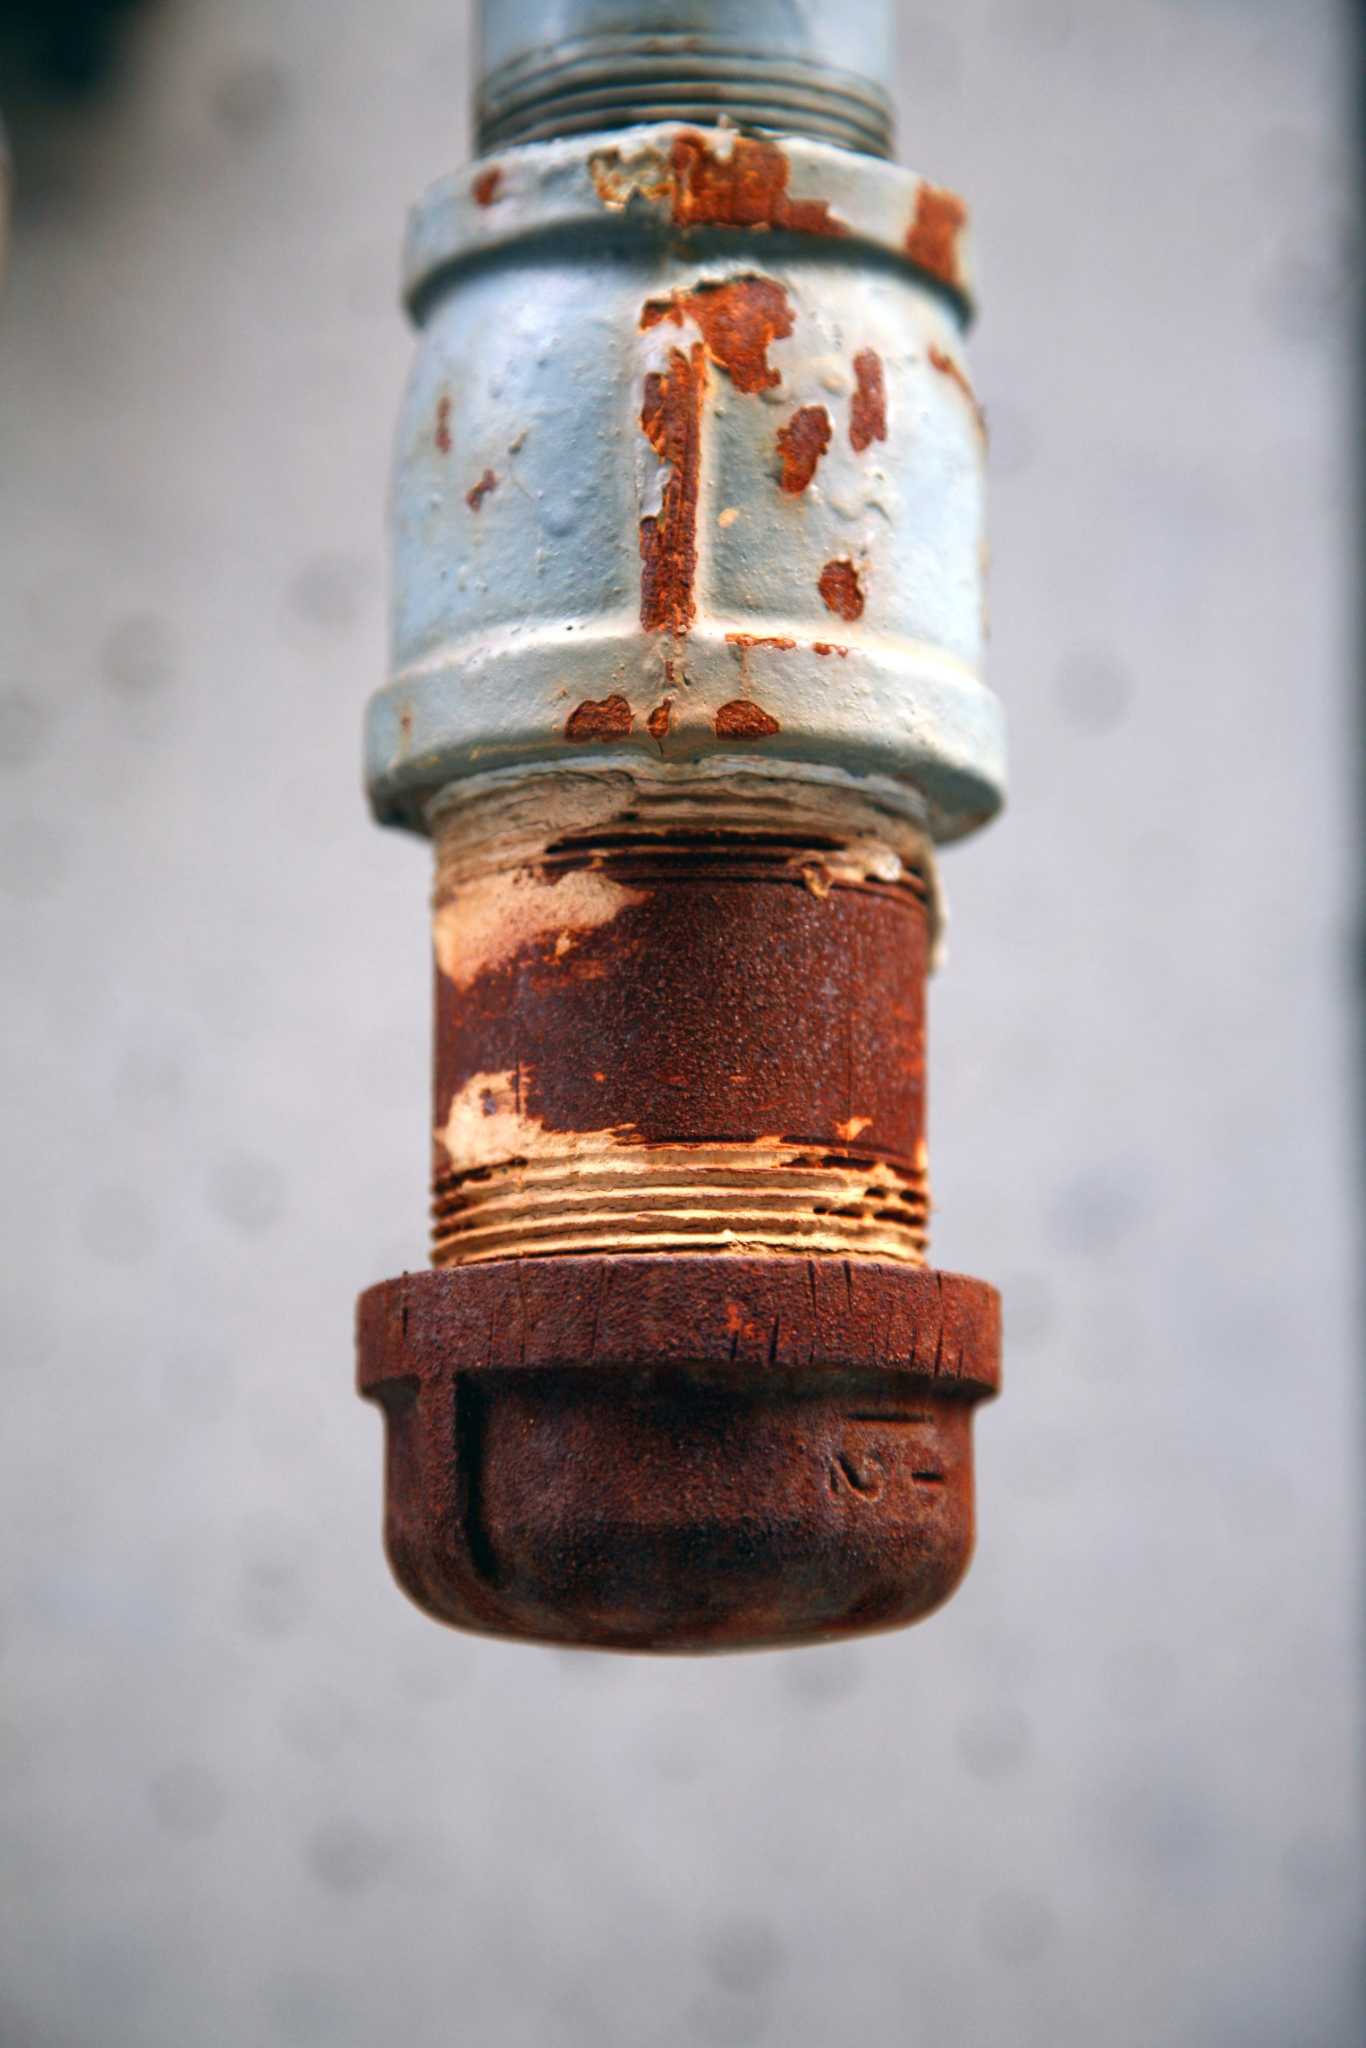 Why Would a Hot Water Pipe Freeze?